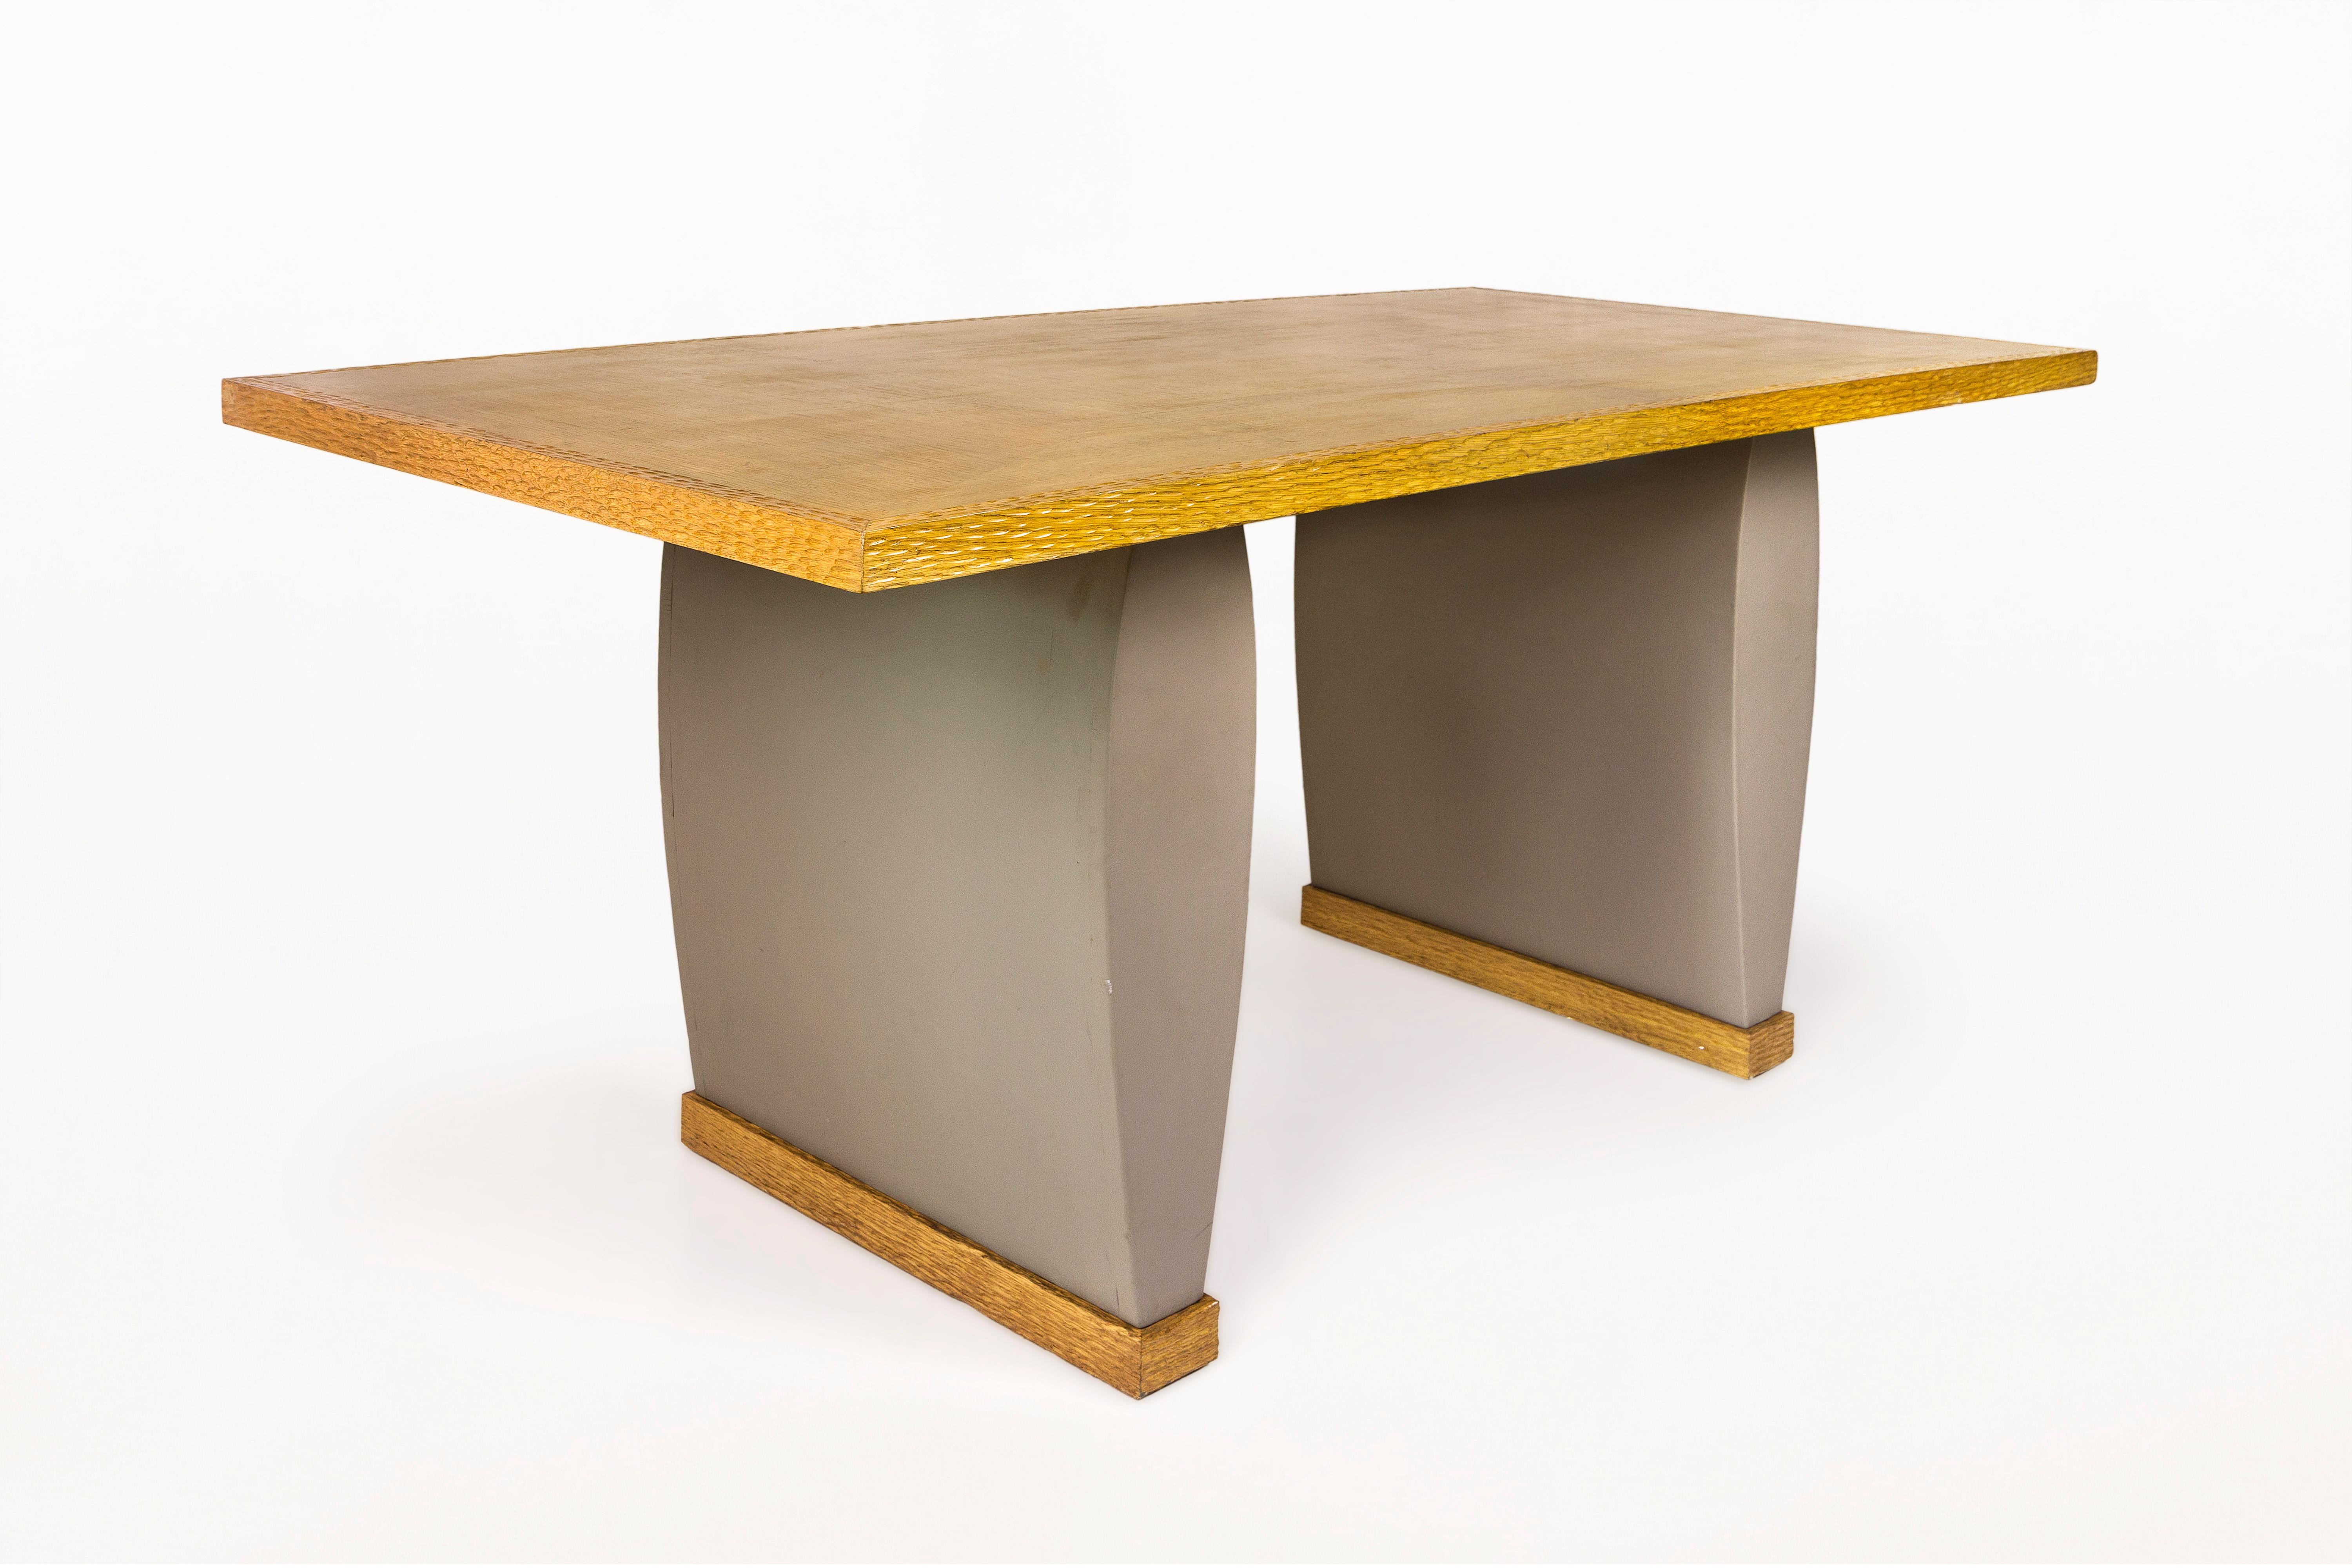 Olivier Gagnère, Neotù Table, 
oak and gray leather, 
circa 1995, France.

Measures: Height 77 cm, width 1m75, depth 90 cm.